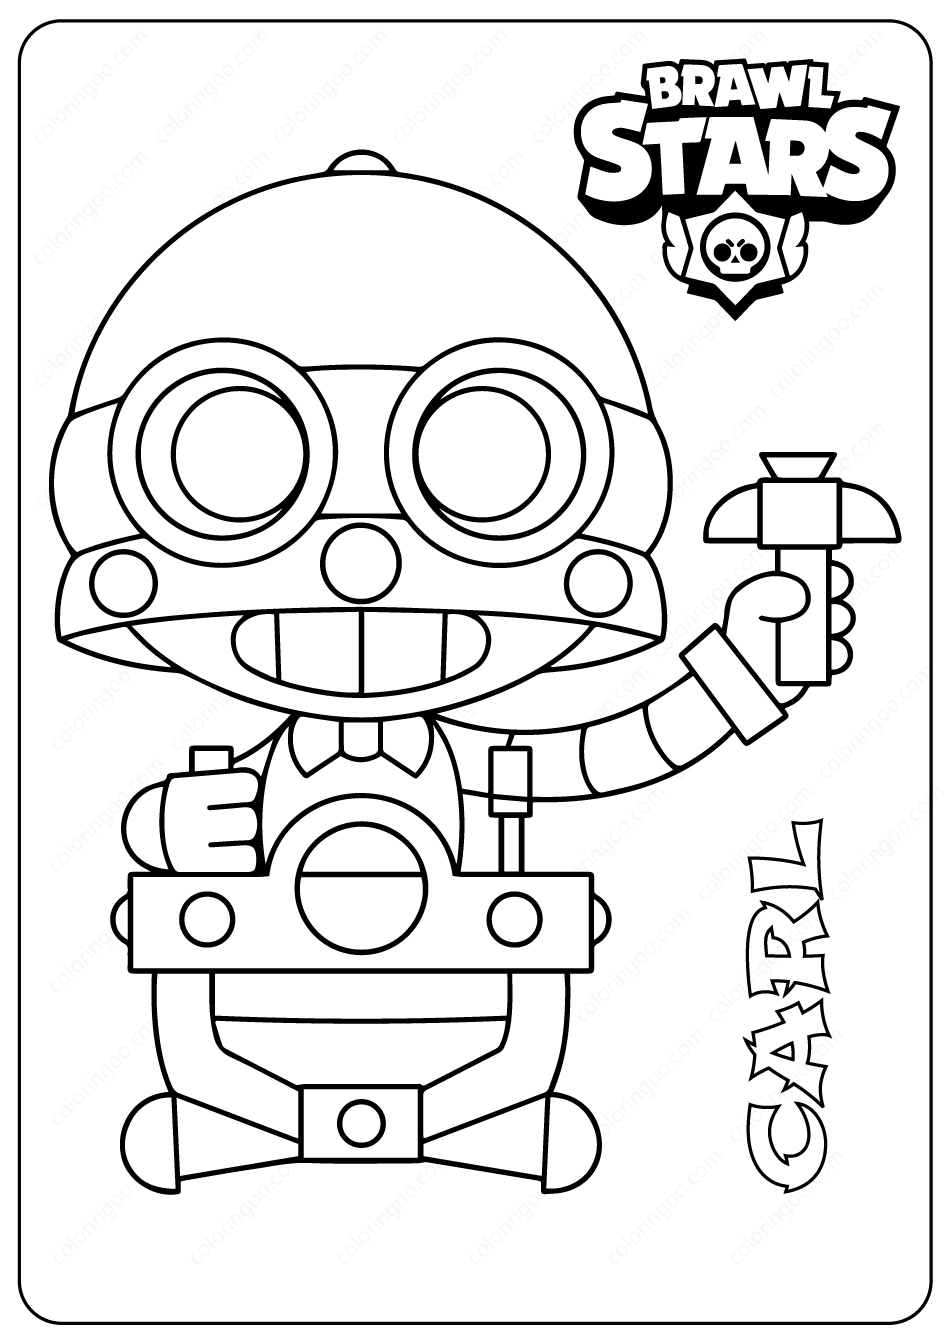 brawl star coloring pages leon cat